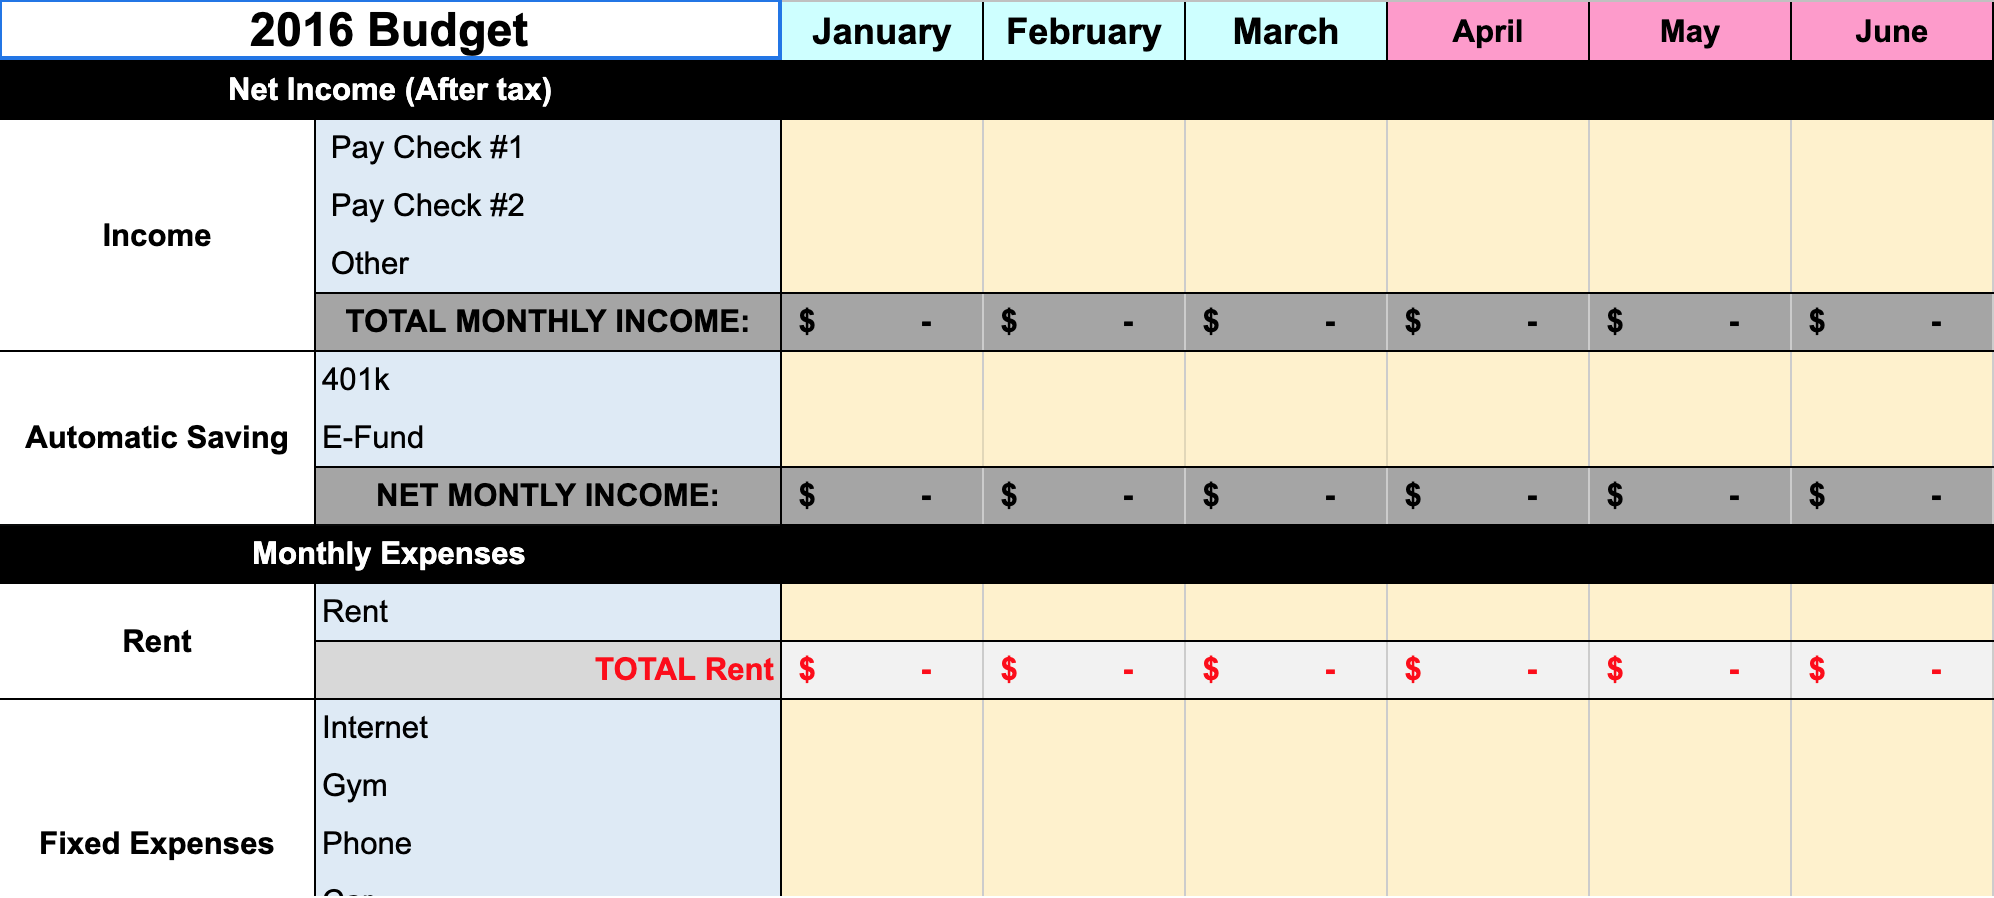 Free monthly budget template reddit